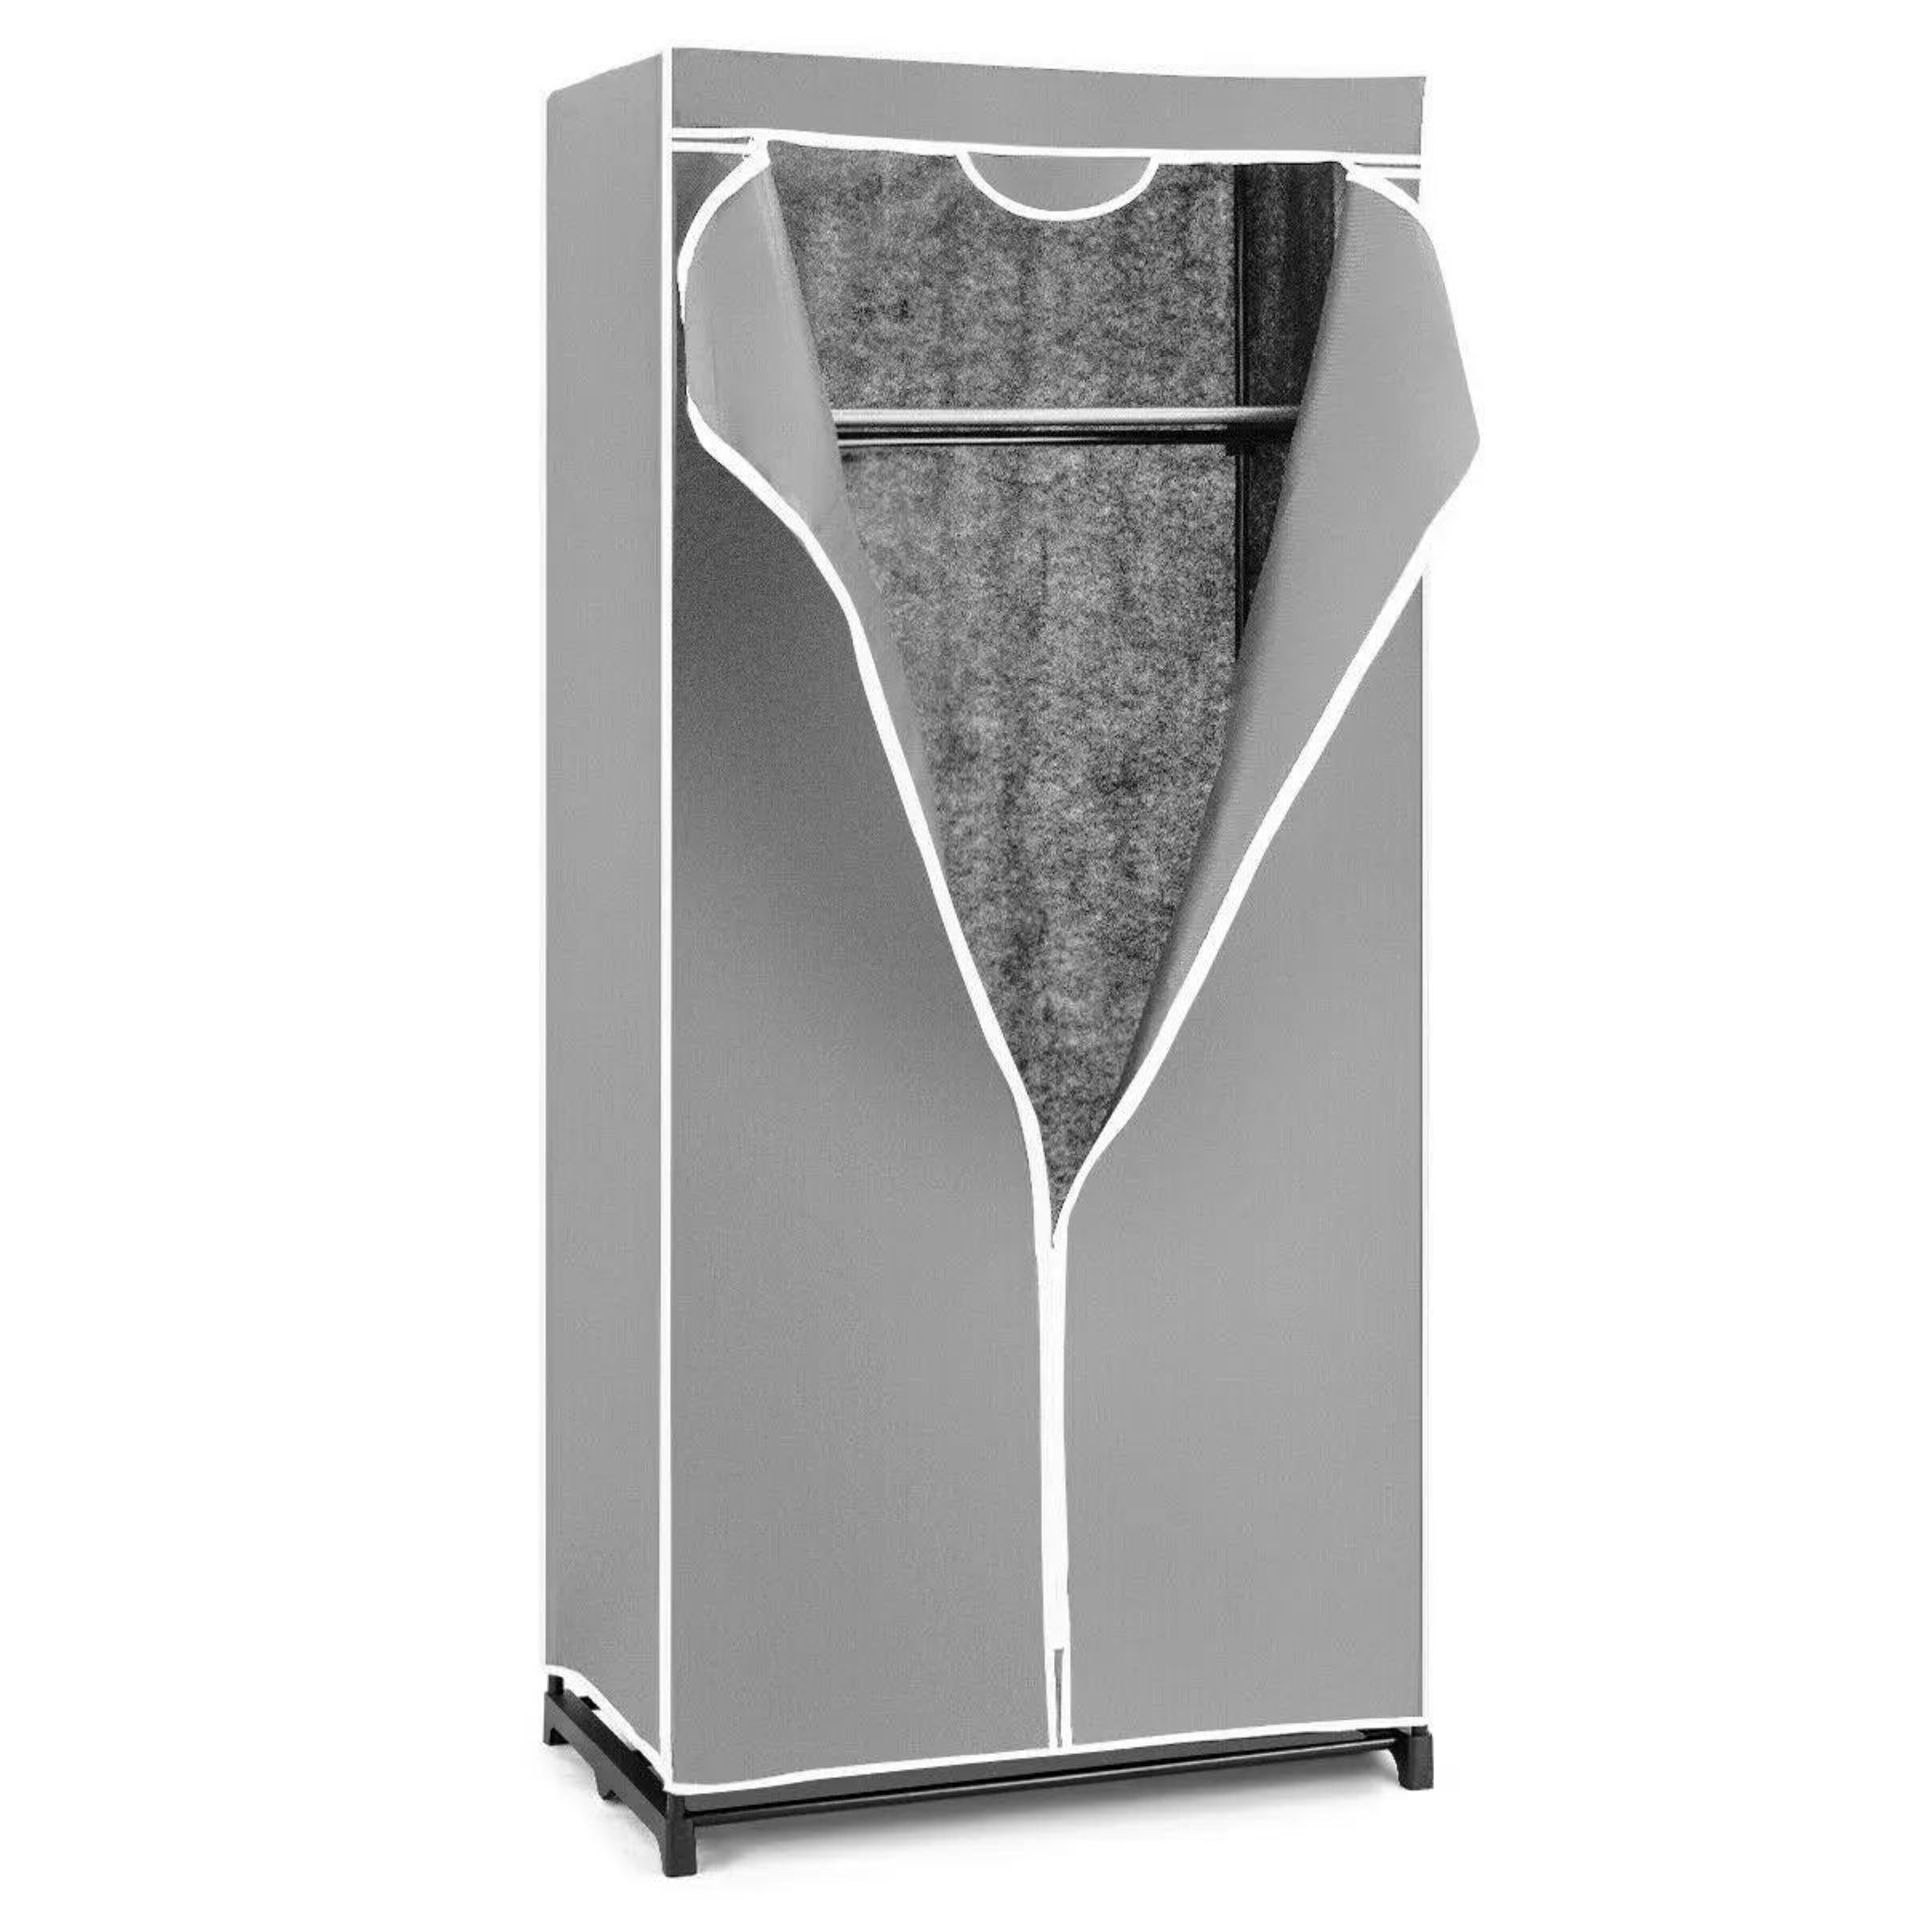 Double Canvas Wardrobe with Dust-proof Cover-Grey. - ER54. Need extra wardrobe space? This double